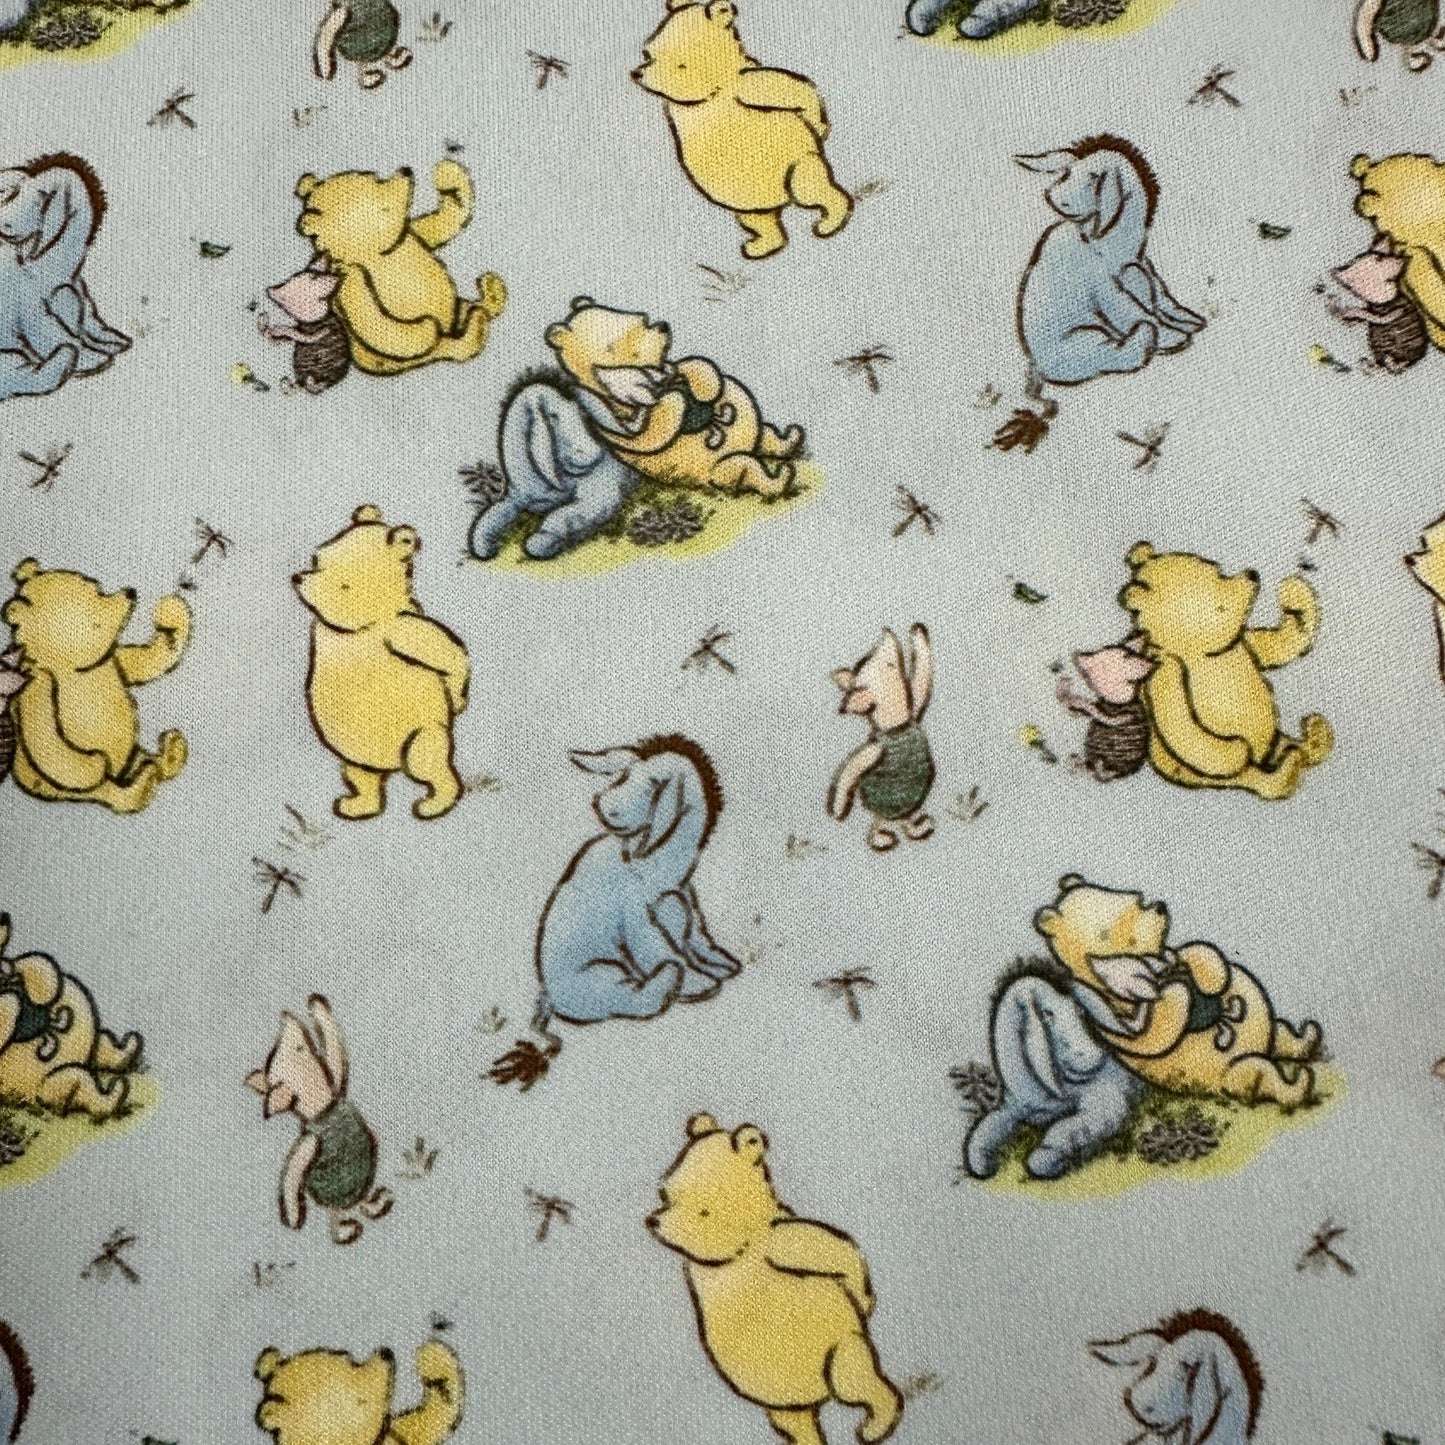 Winnie the Pooh and Friends on Blue 1 mil PUL Fabric - Made in the USA - Nature's Fabrics